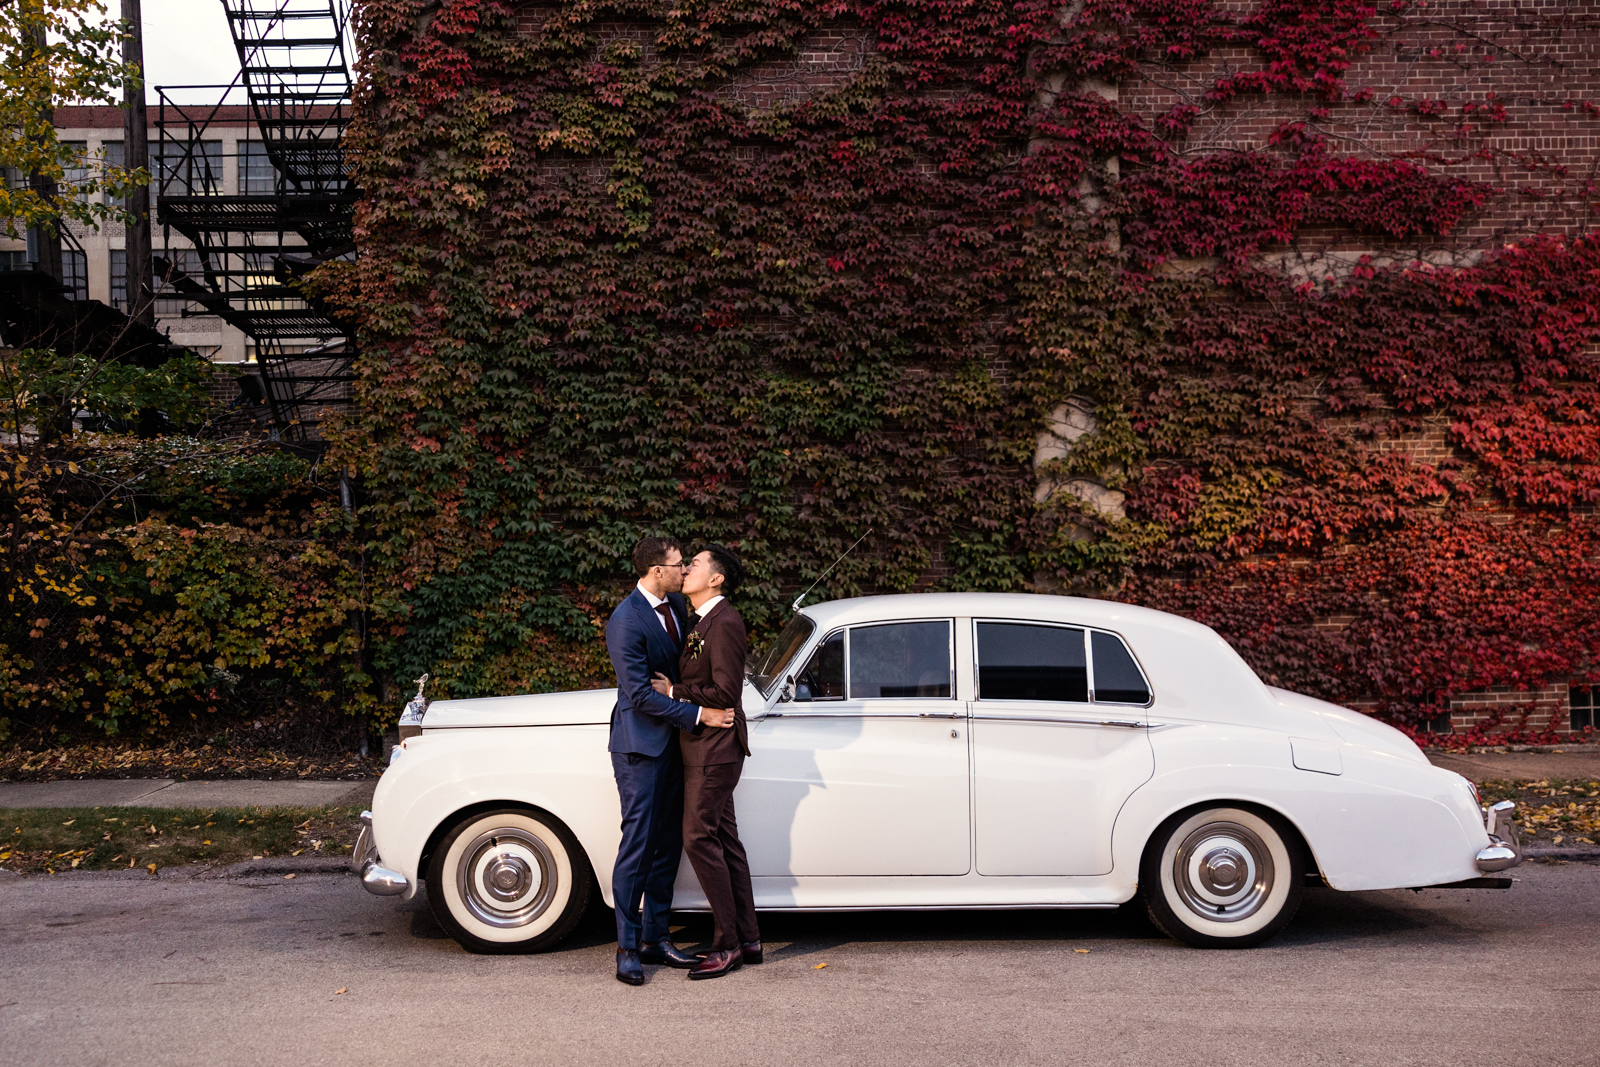 Groom and groom kissing with fall foliage in front of Rolls Royce by Chicago wedding photographer Emma Mullins Photography